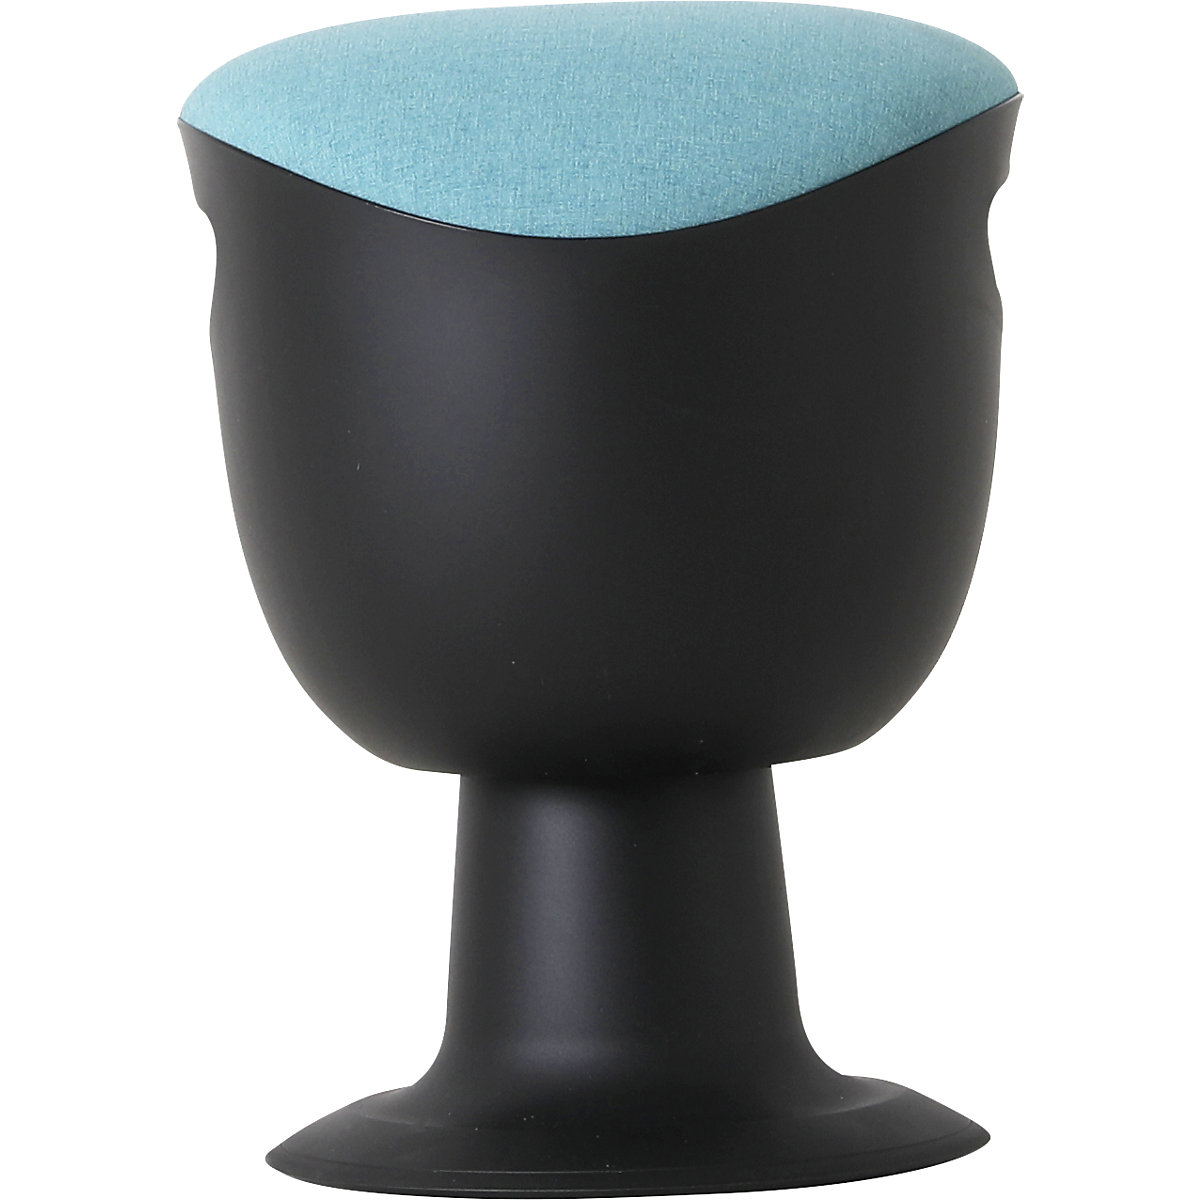 Flexible stool, height adjustable 465 – 585 mm, upholstered seat, turquoise cover-6